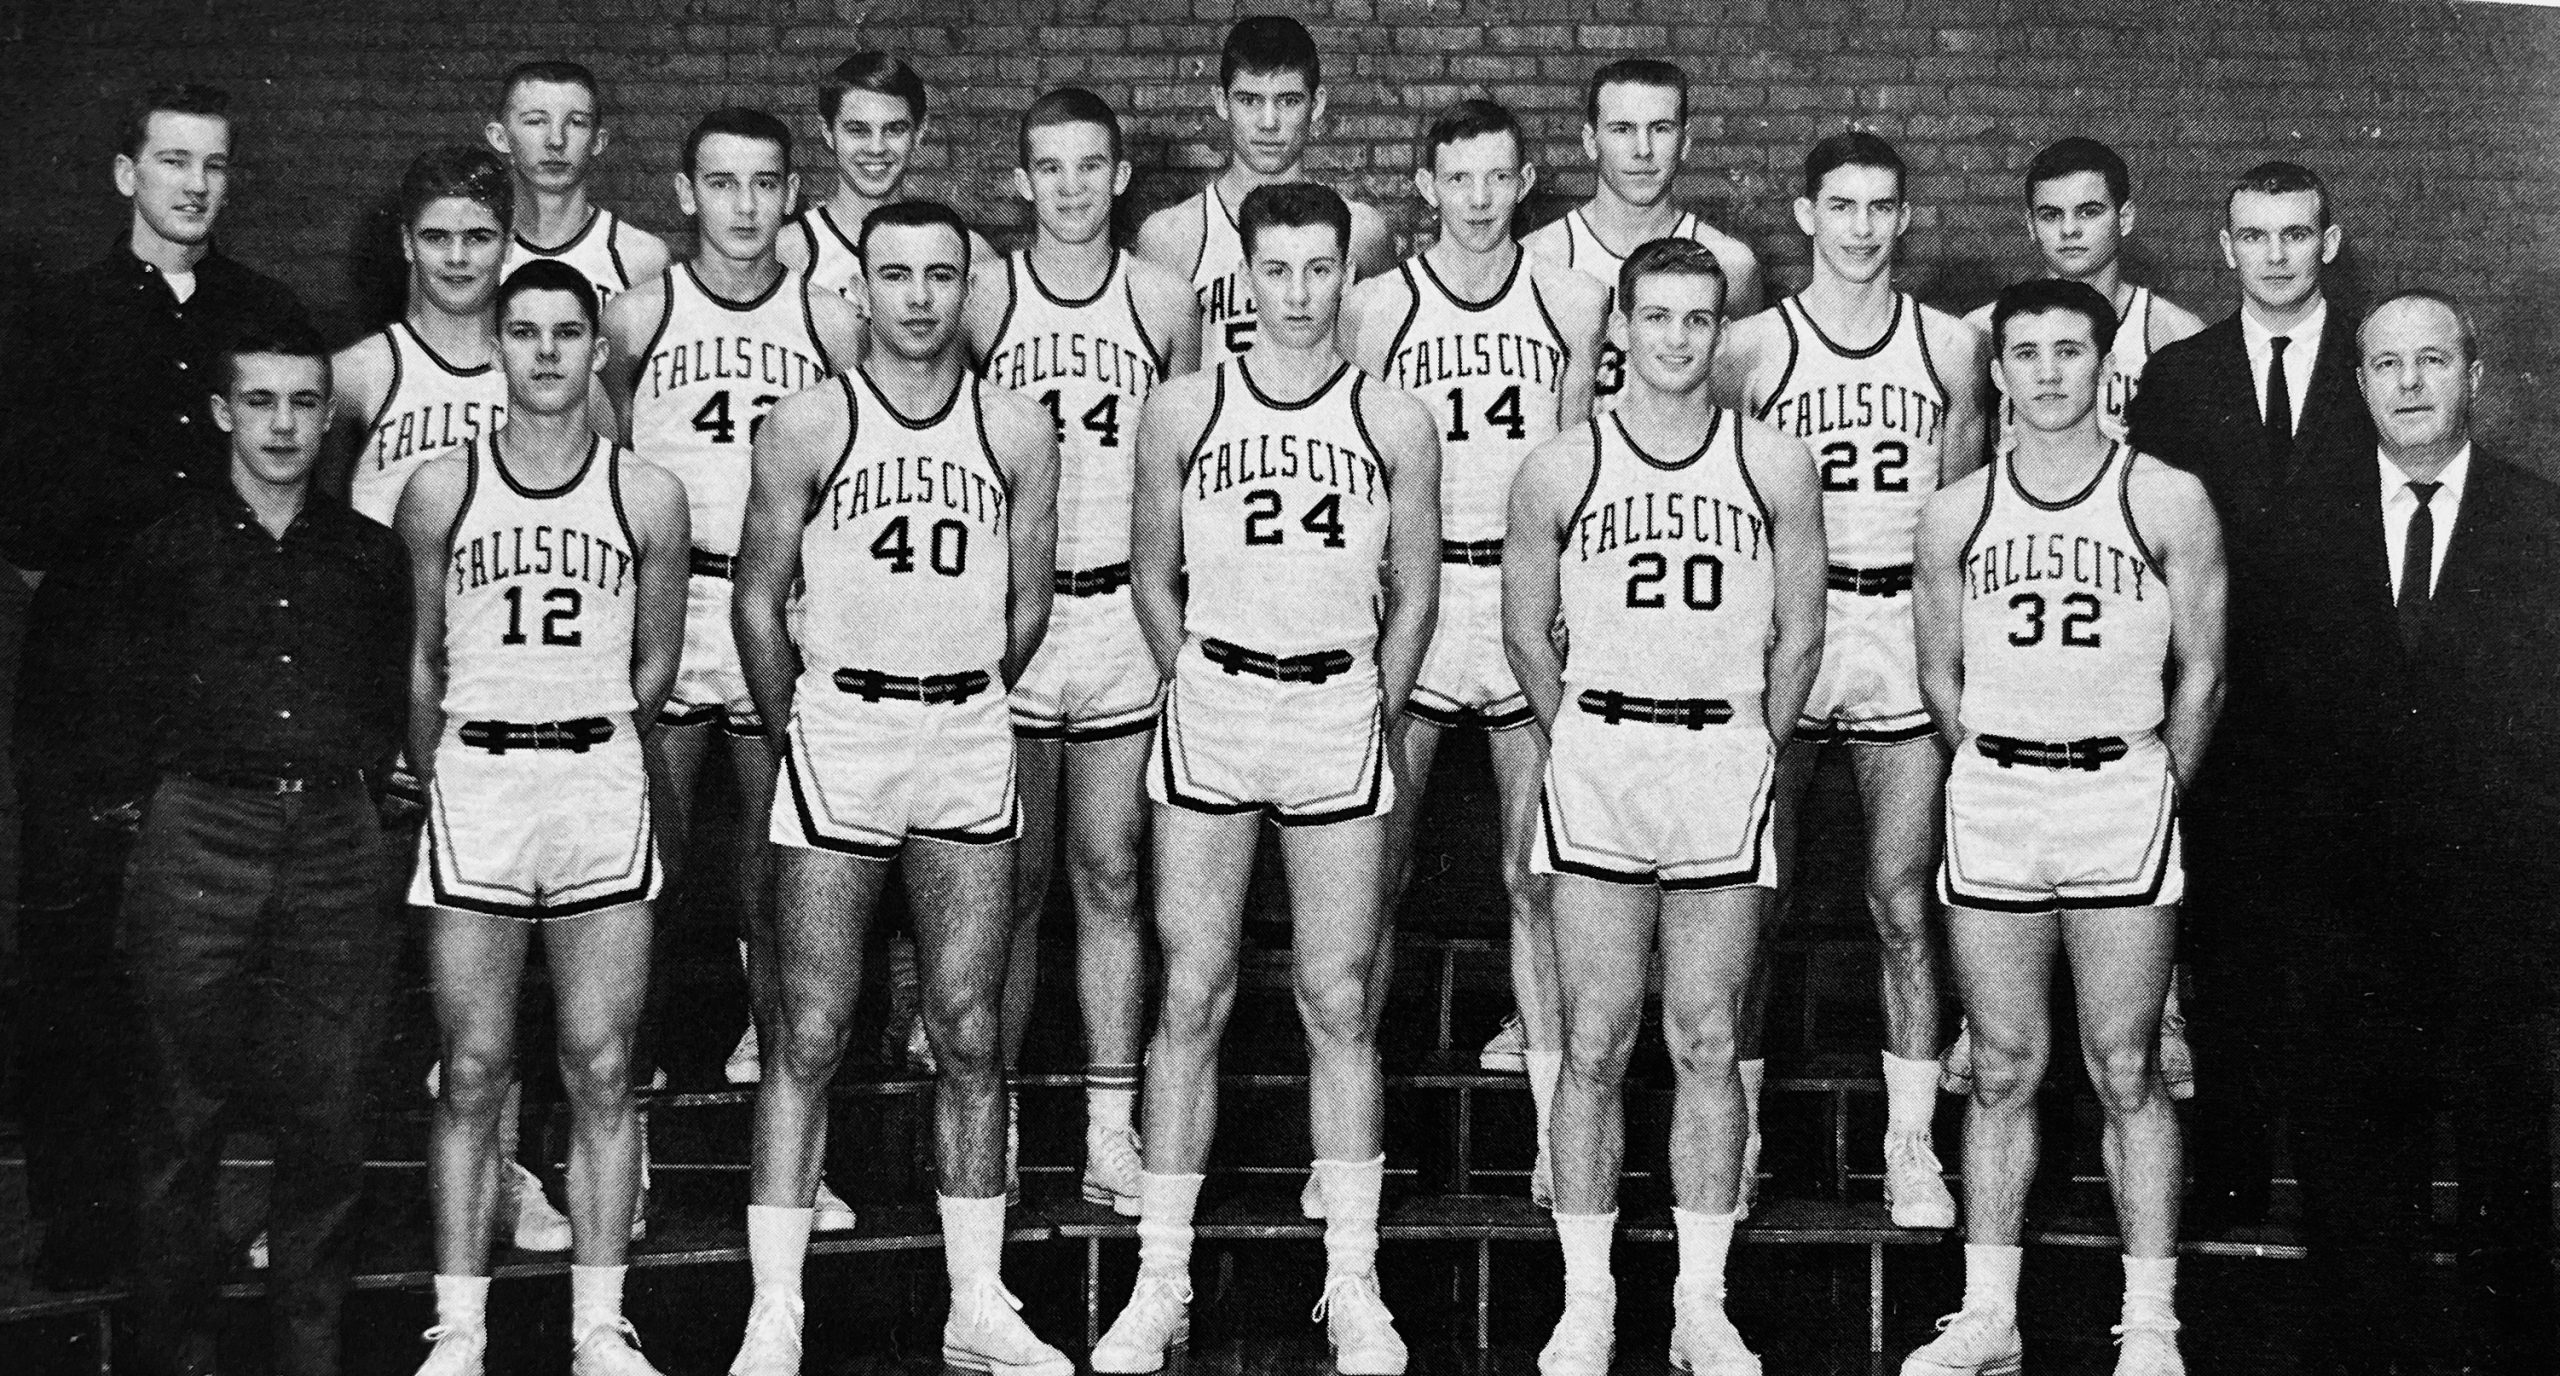 1963 Tiger basketball team had that little something extra that was special